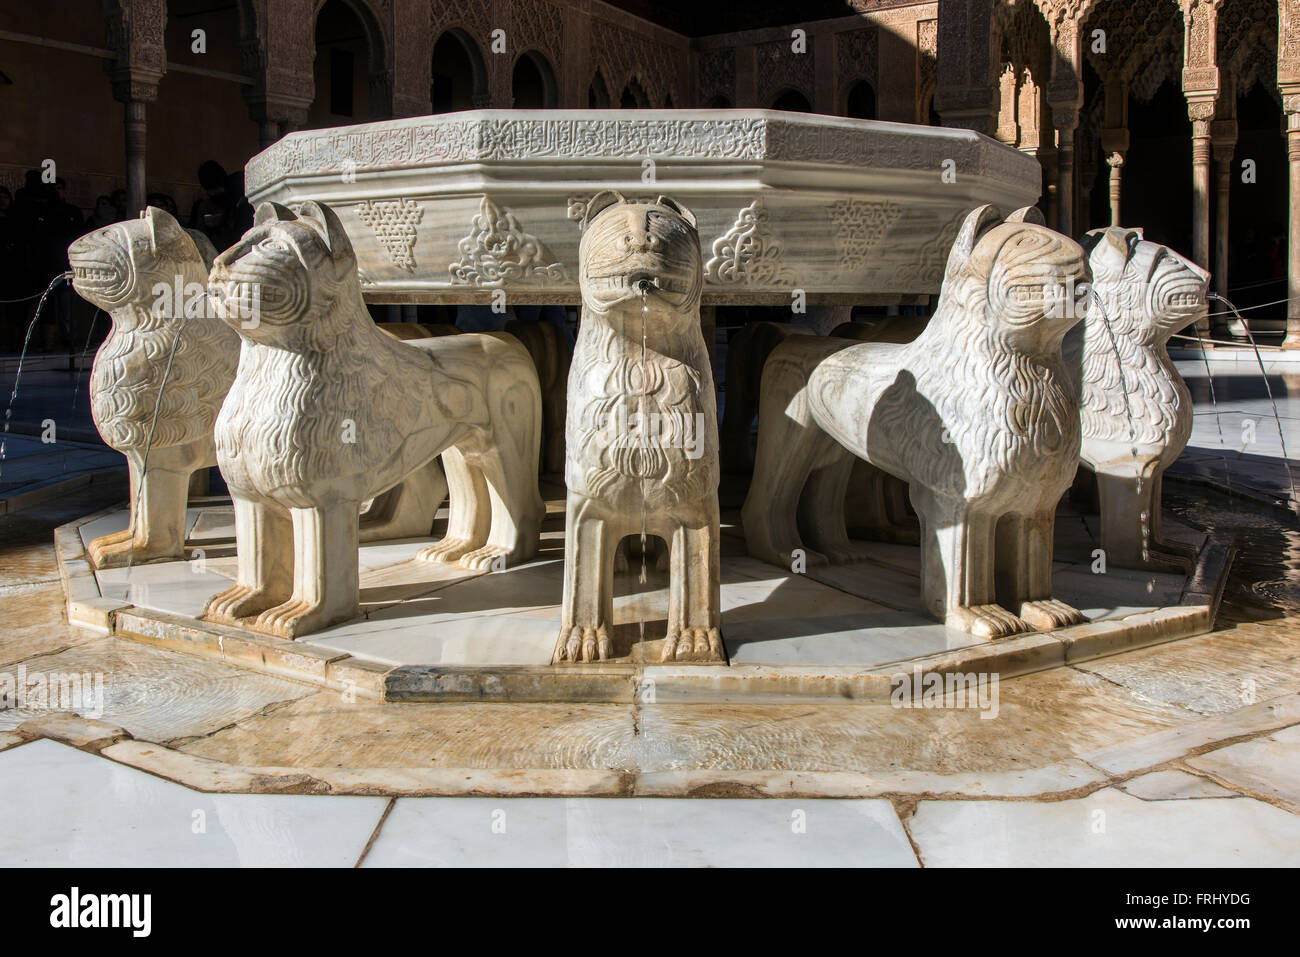 Fountain of the Court of the Lions, Palace of the Lions, Alhambra palace, Granada, Andalusia, Spain Stock Photo